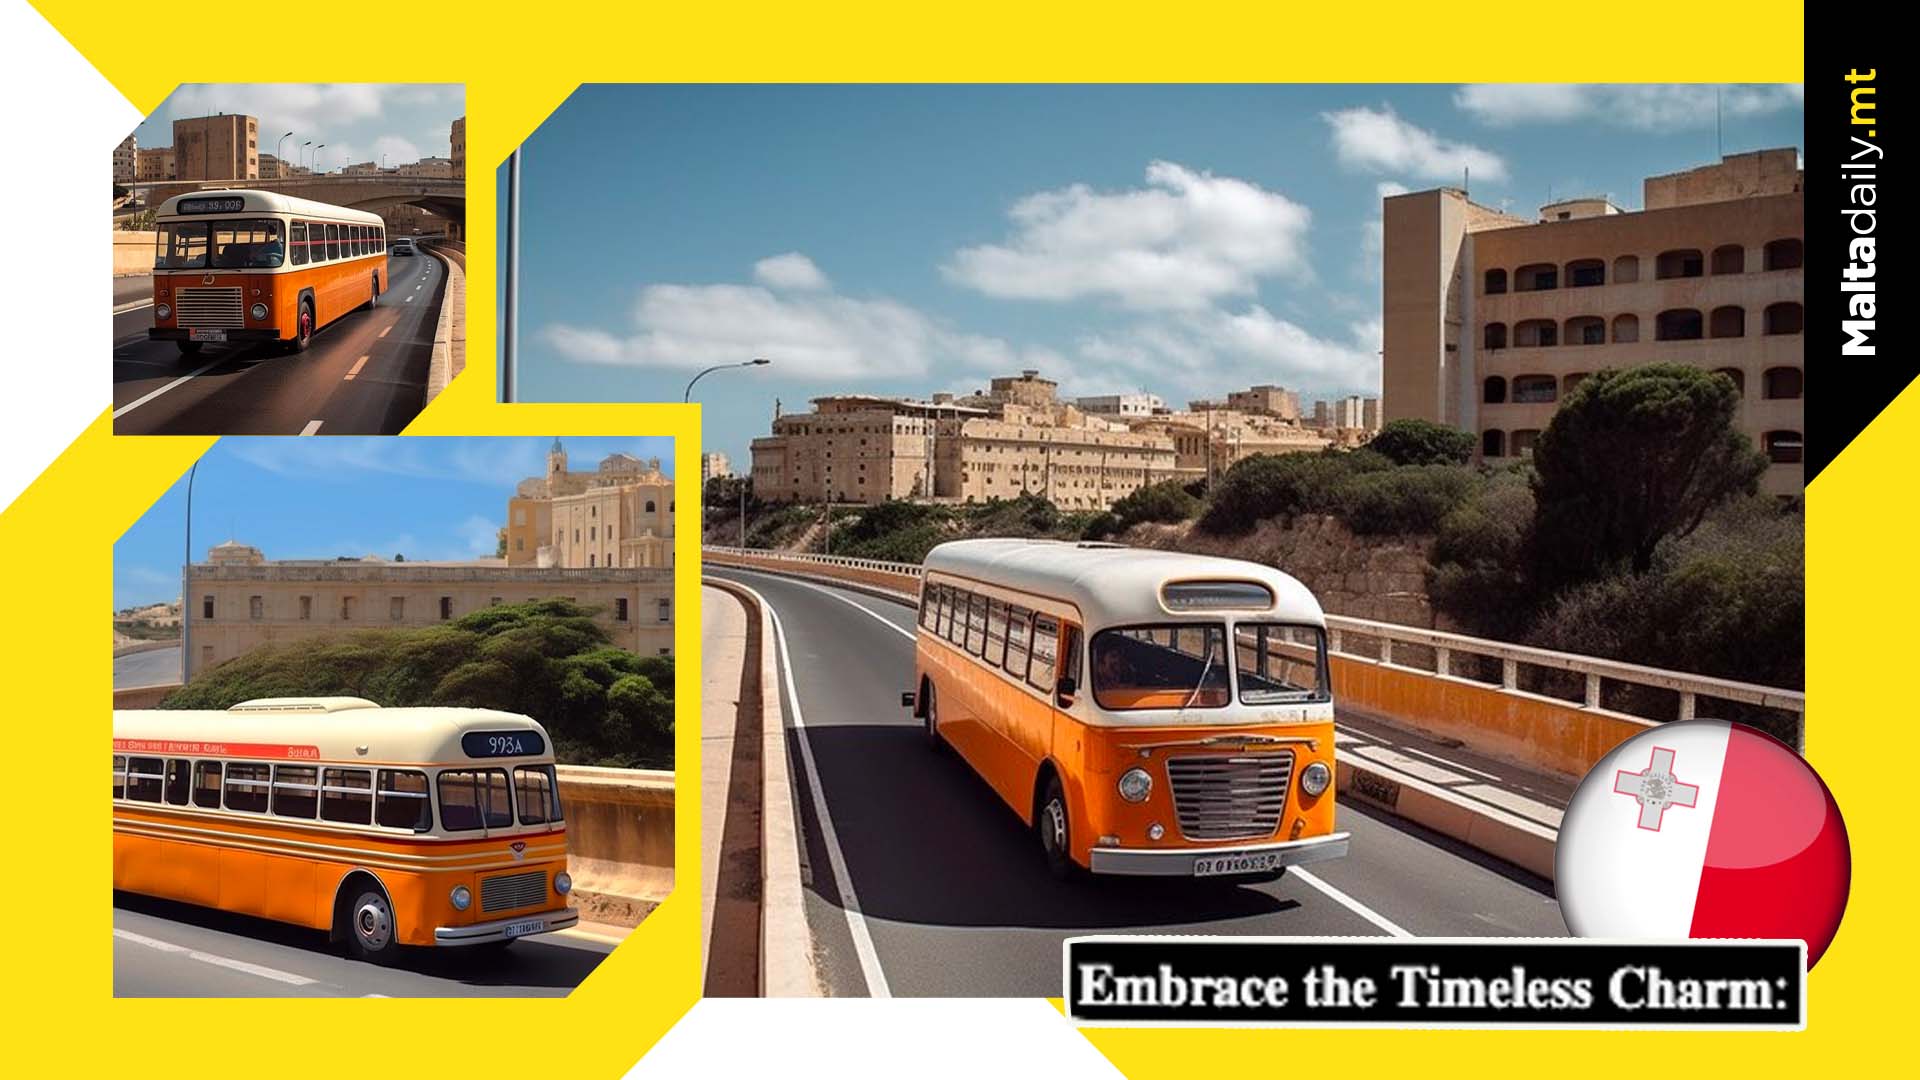 What if old Tallinja buses drove on Malta's current roads?